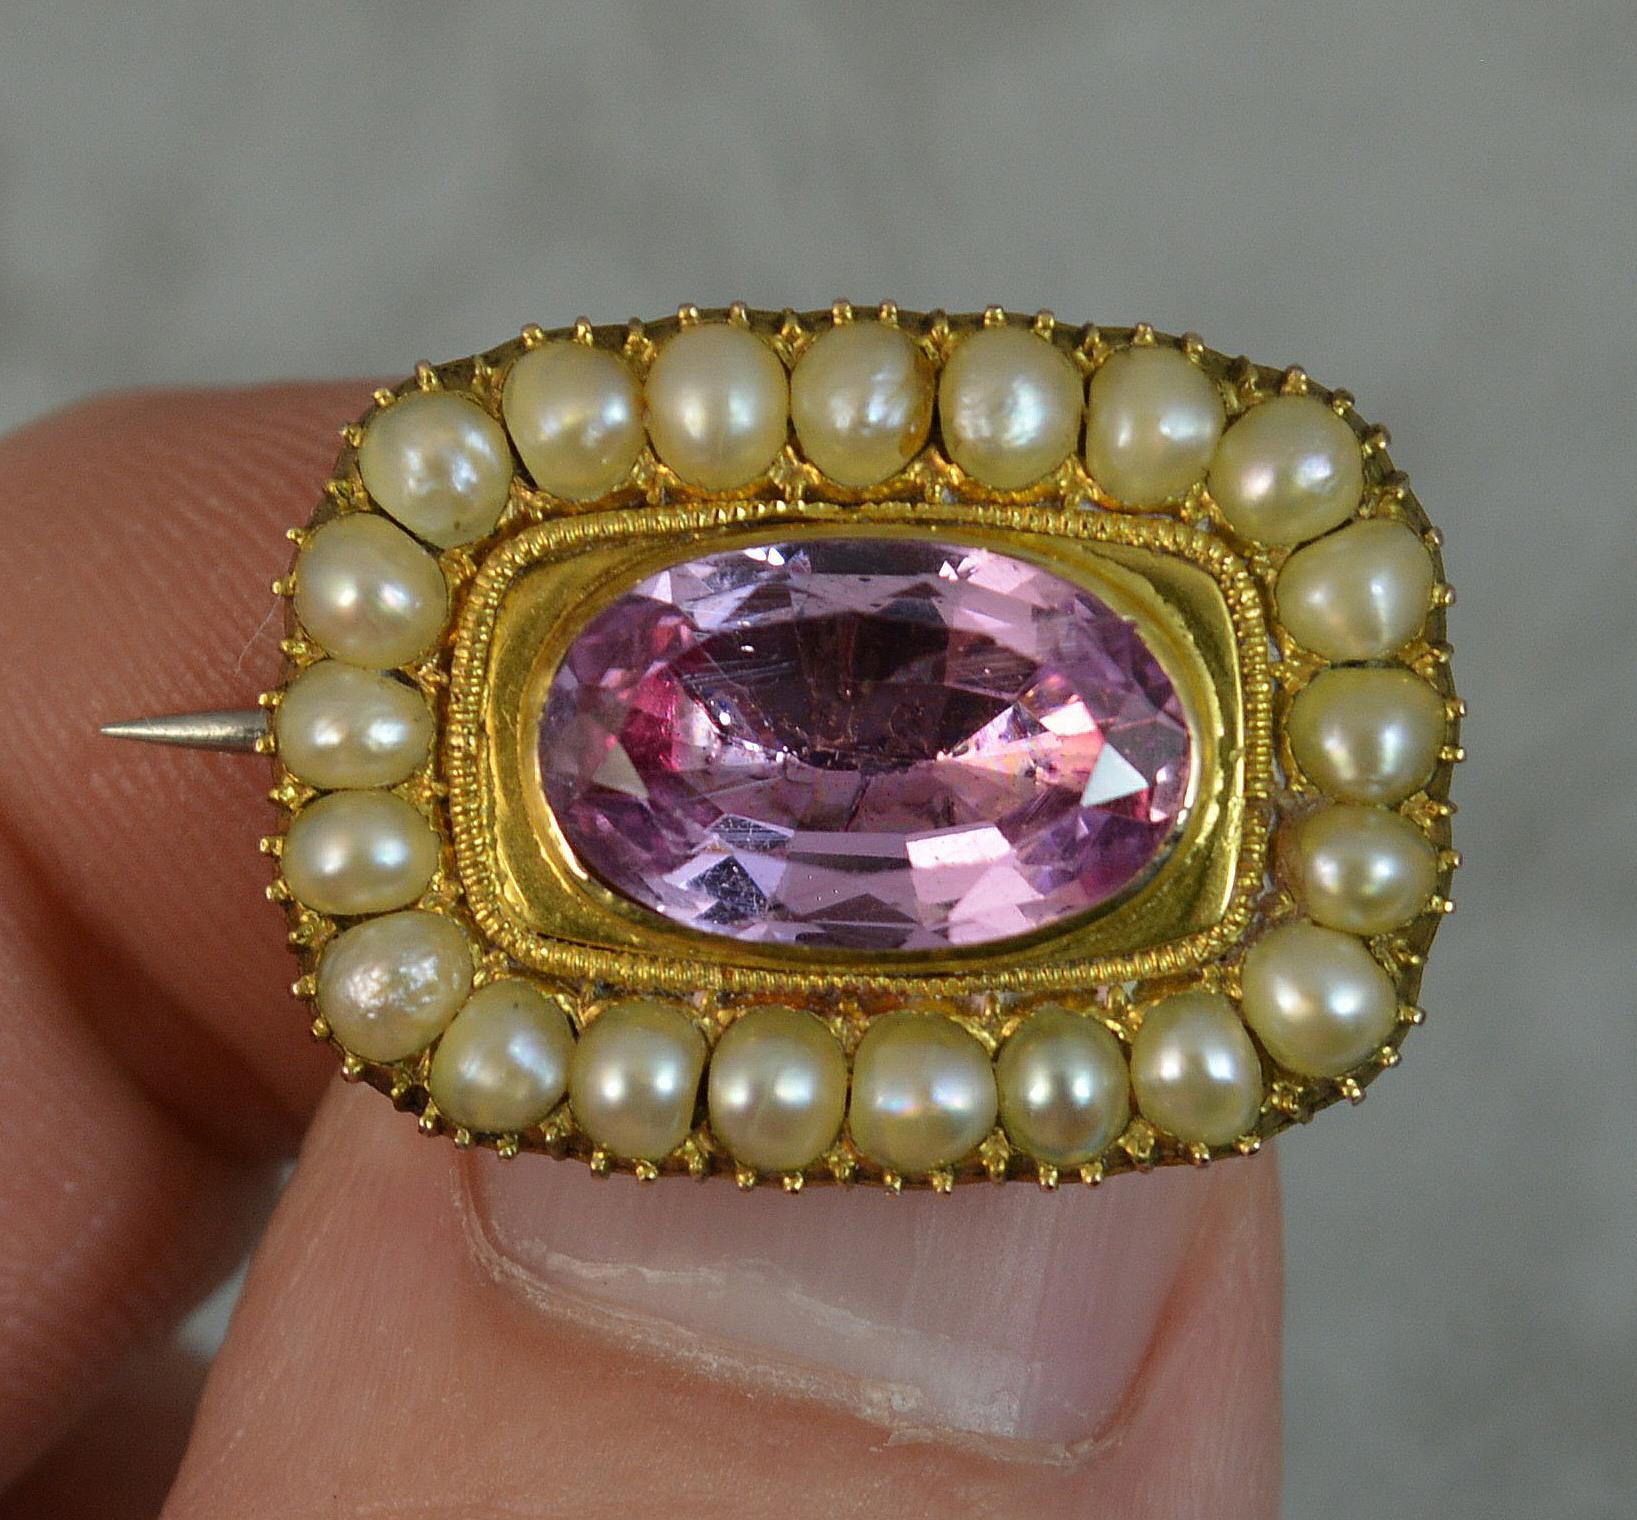 Oval Cut Georgian Foiled Certified Imperial Pink Topaz Pearl Brooch in 15ct Gold in Box